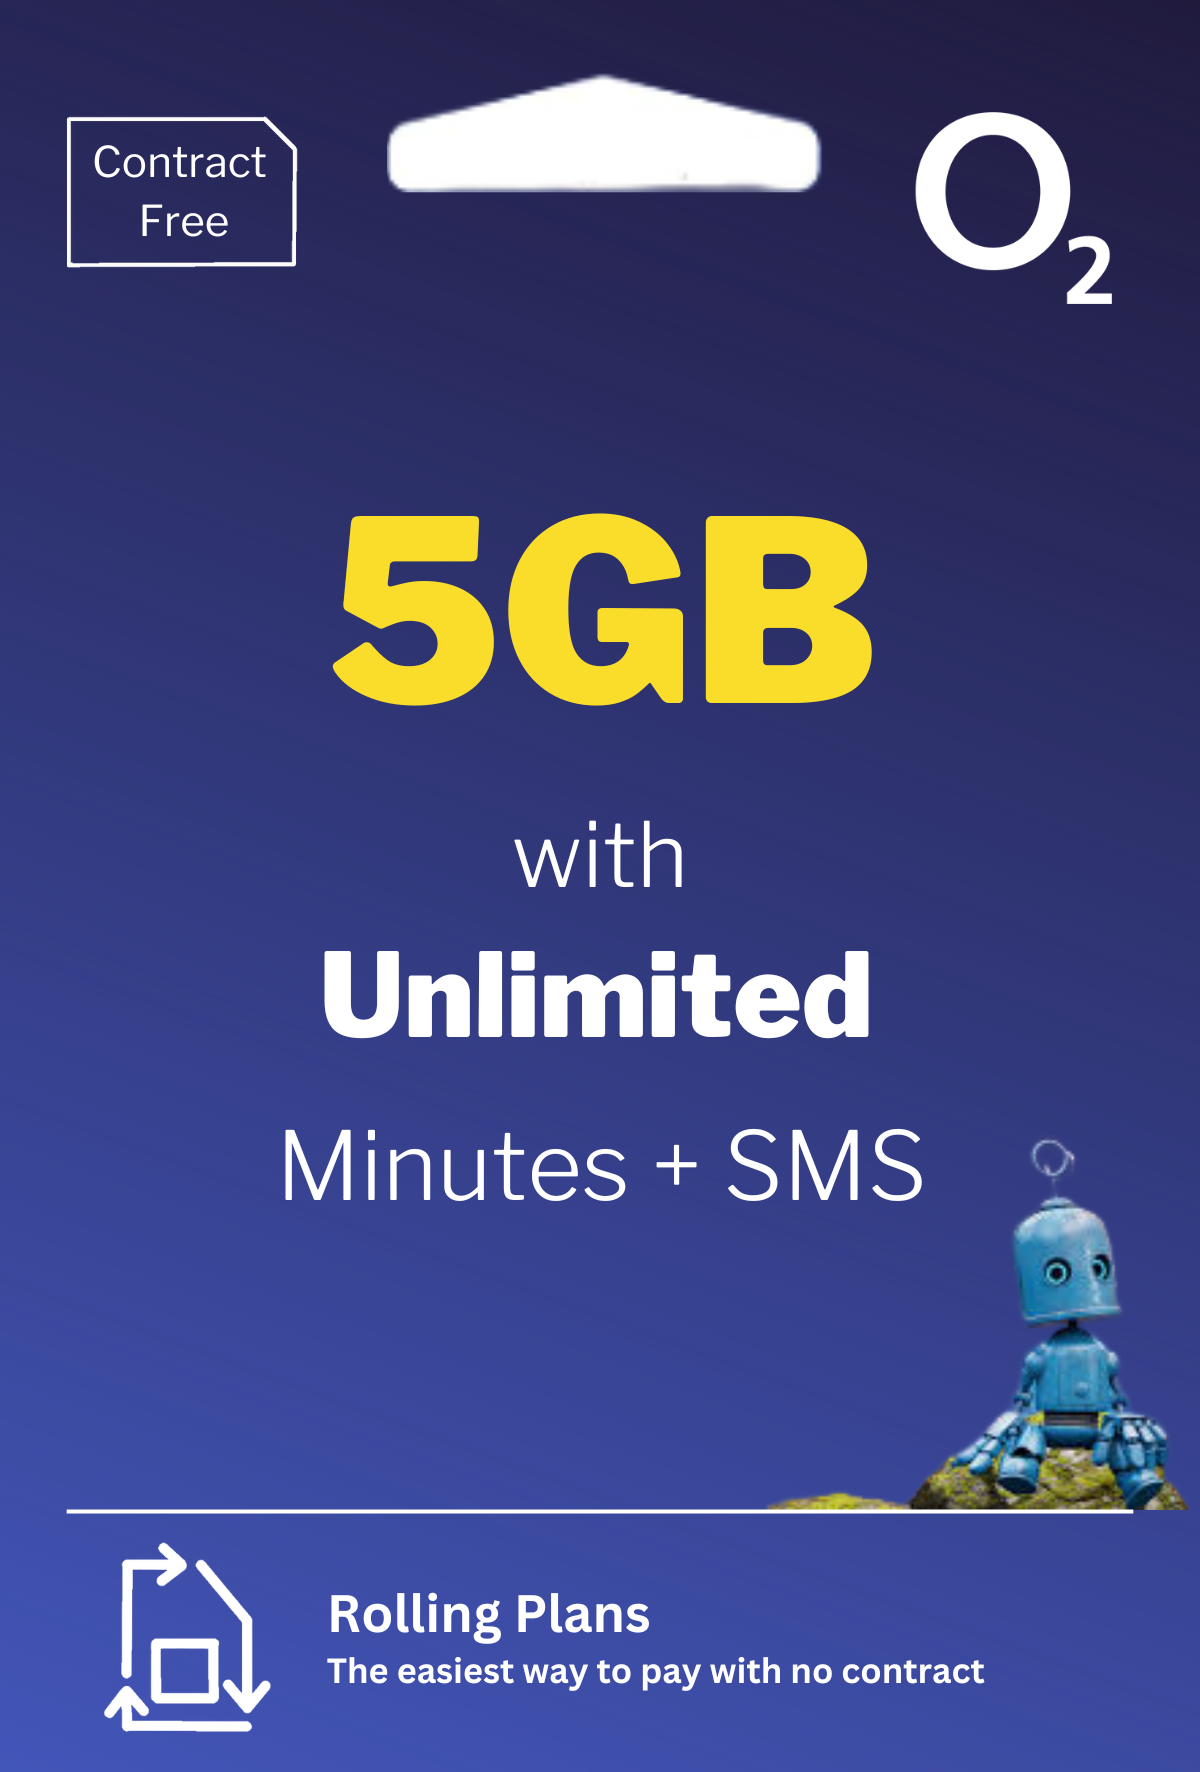 5GB DATA + Unlimited calls and SMS.